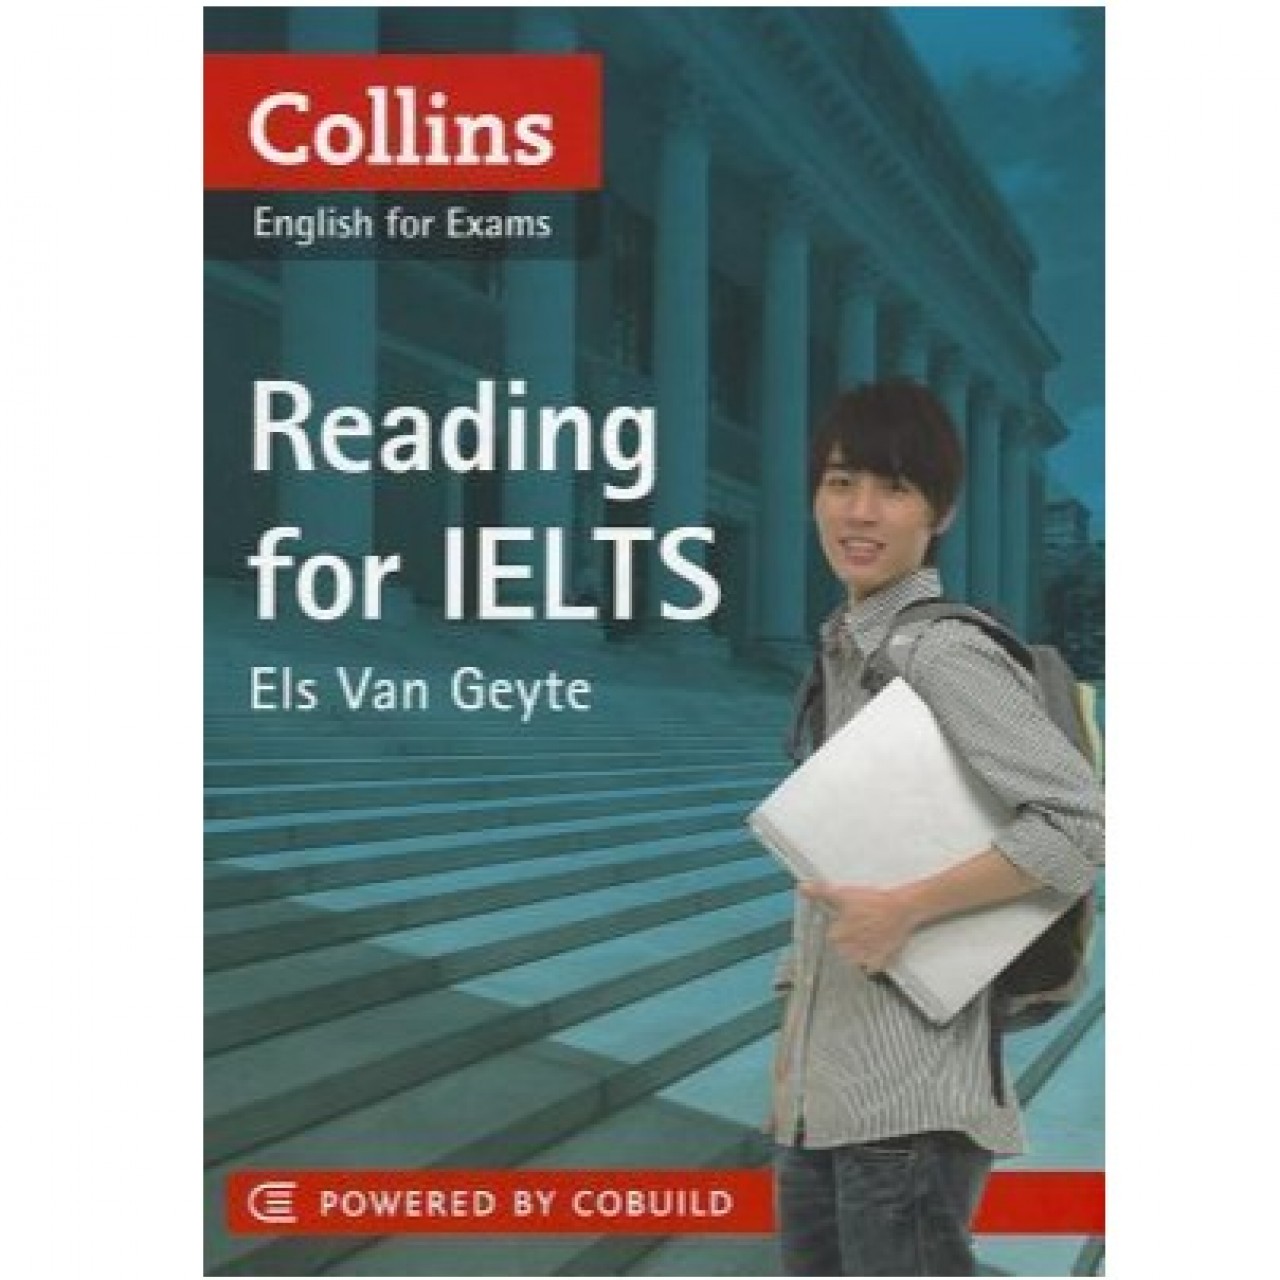 Collins English For Exams: Reading For IELTS By Els Van Geyte - Paperback 2011